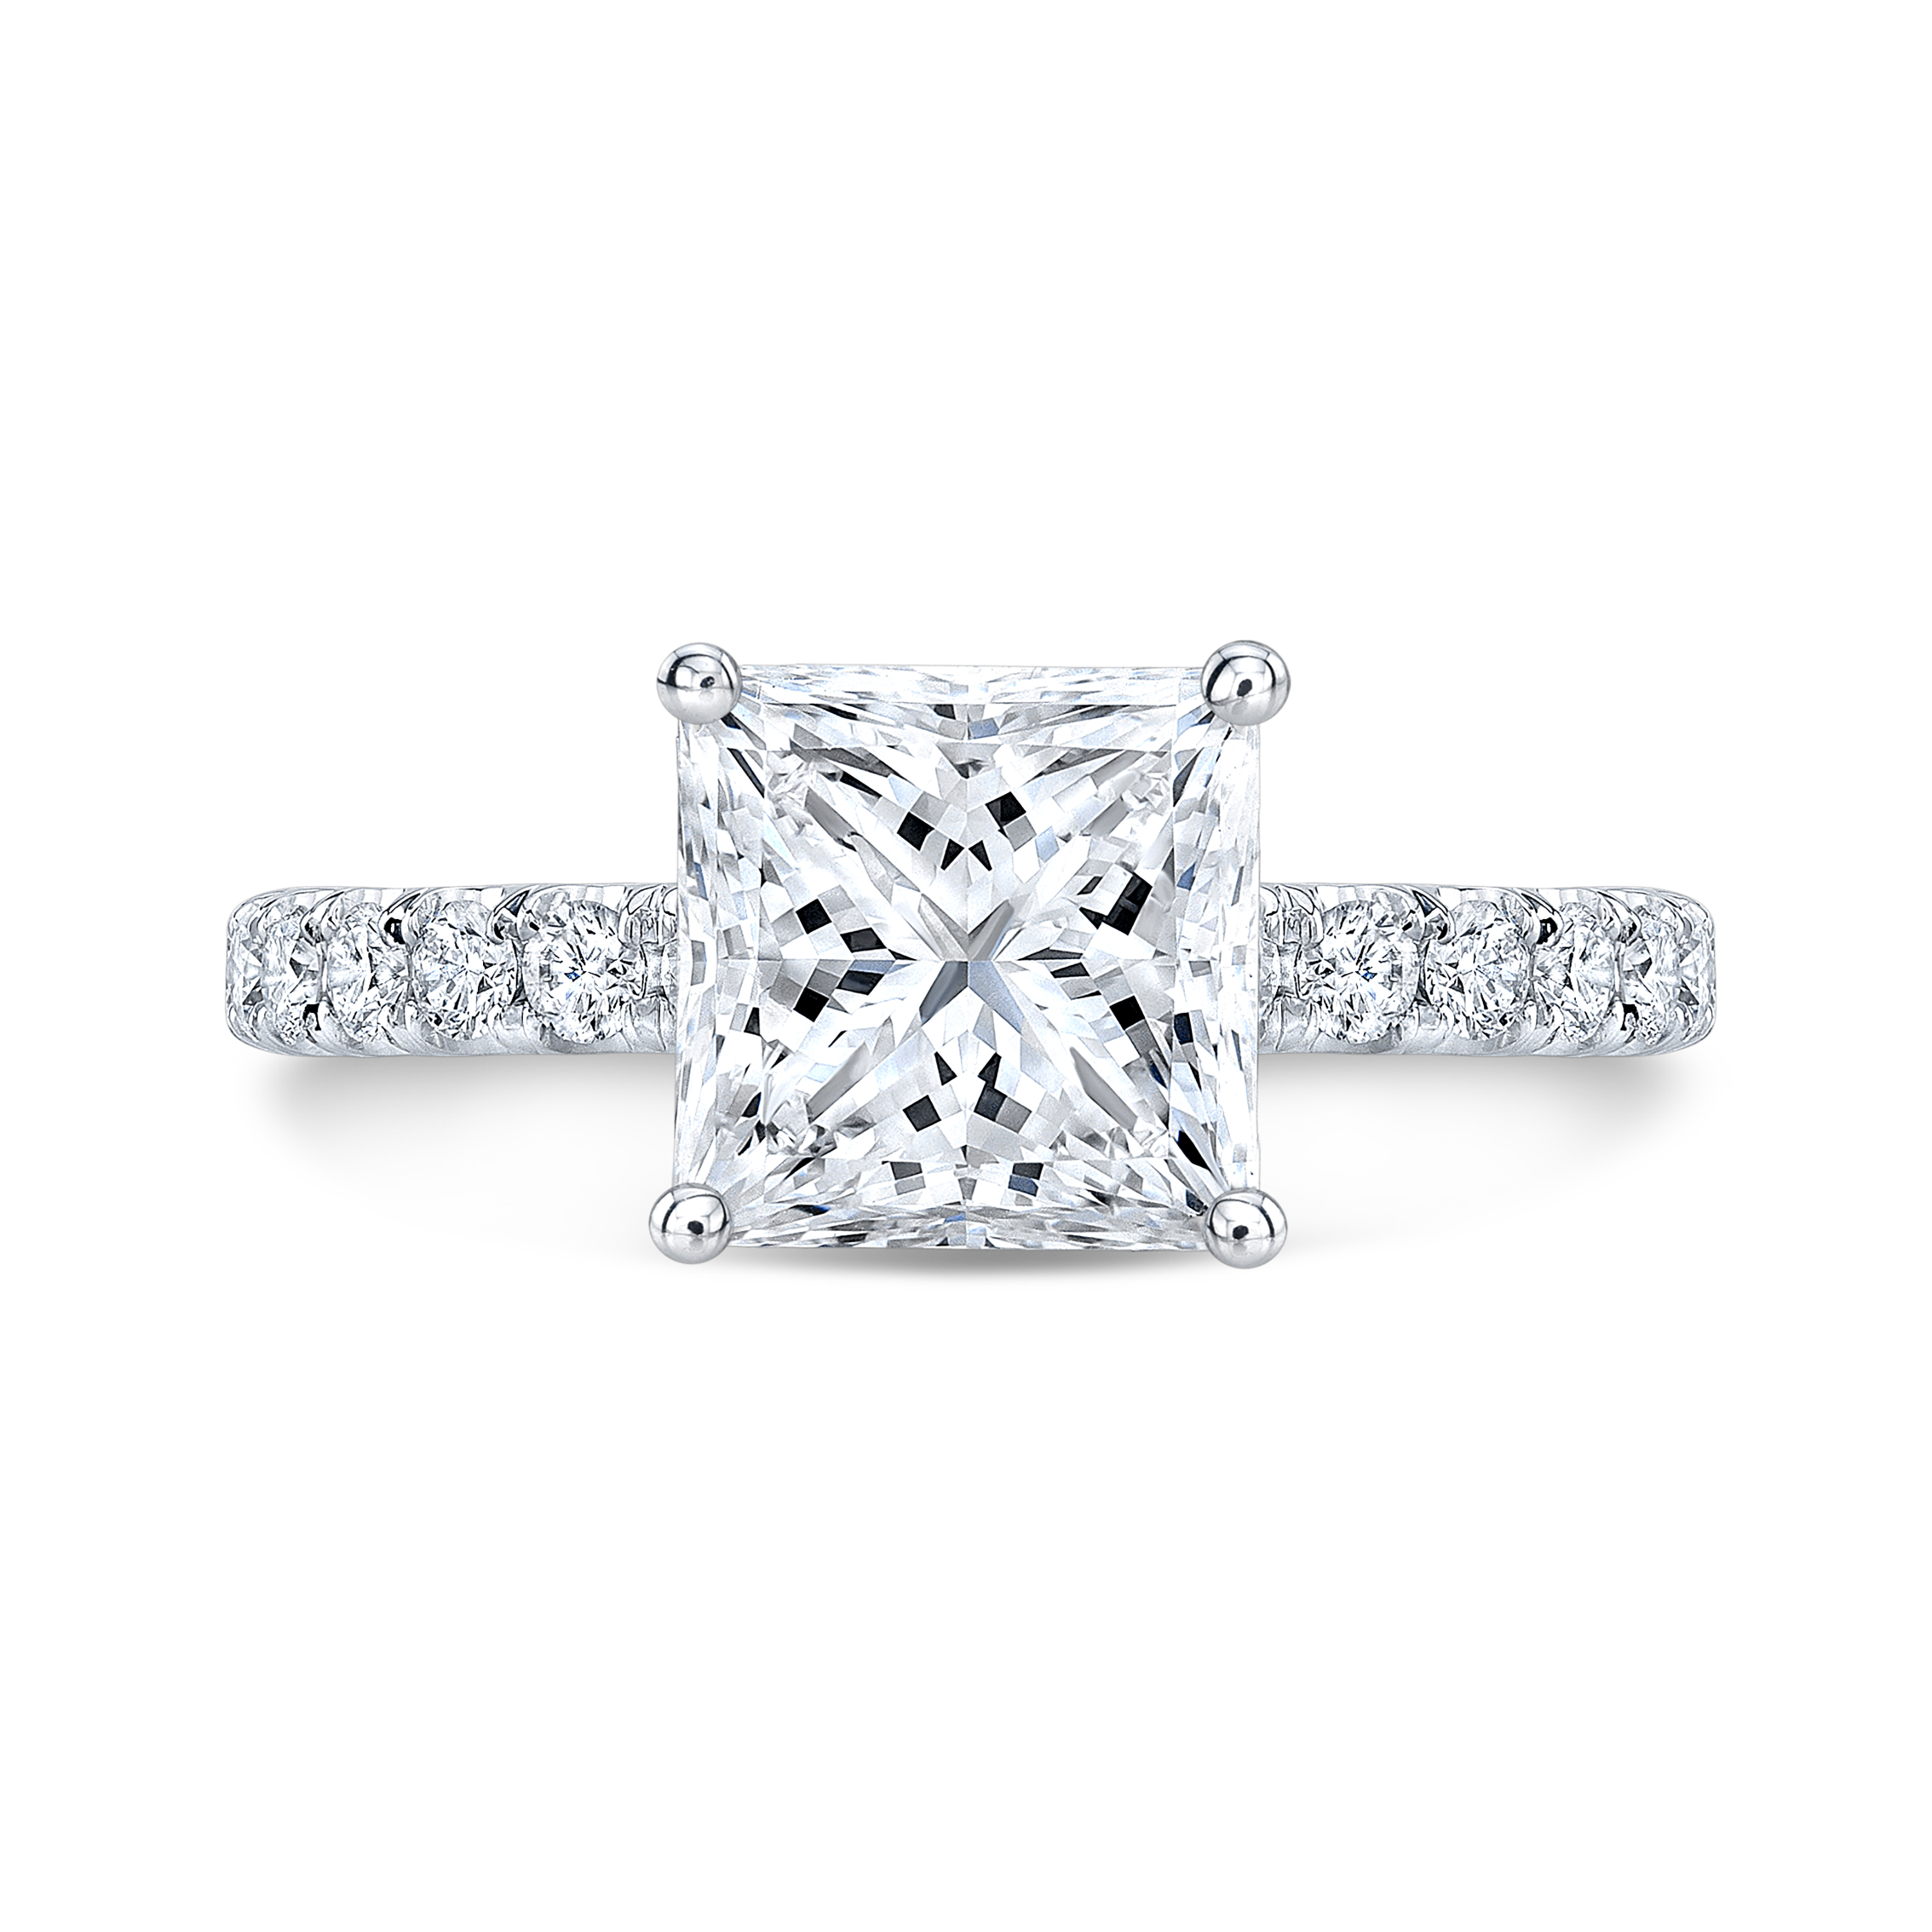 1 CT. T.W. Princess-Cut Diamond Engagement Ring in 14K Rose Gold | Zales